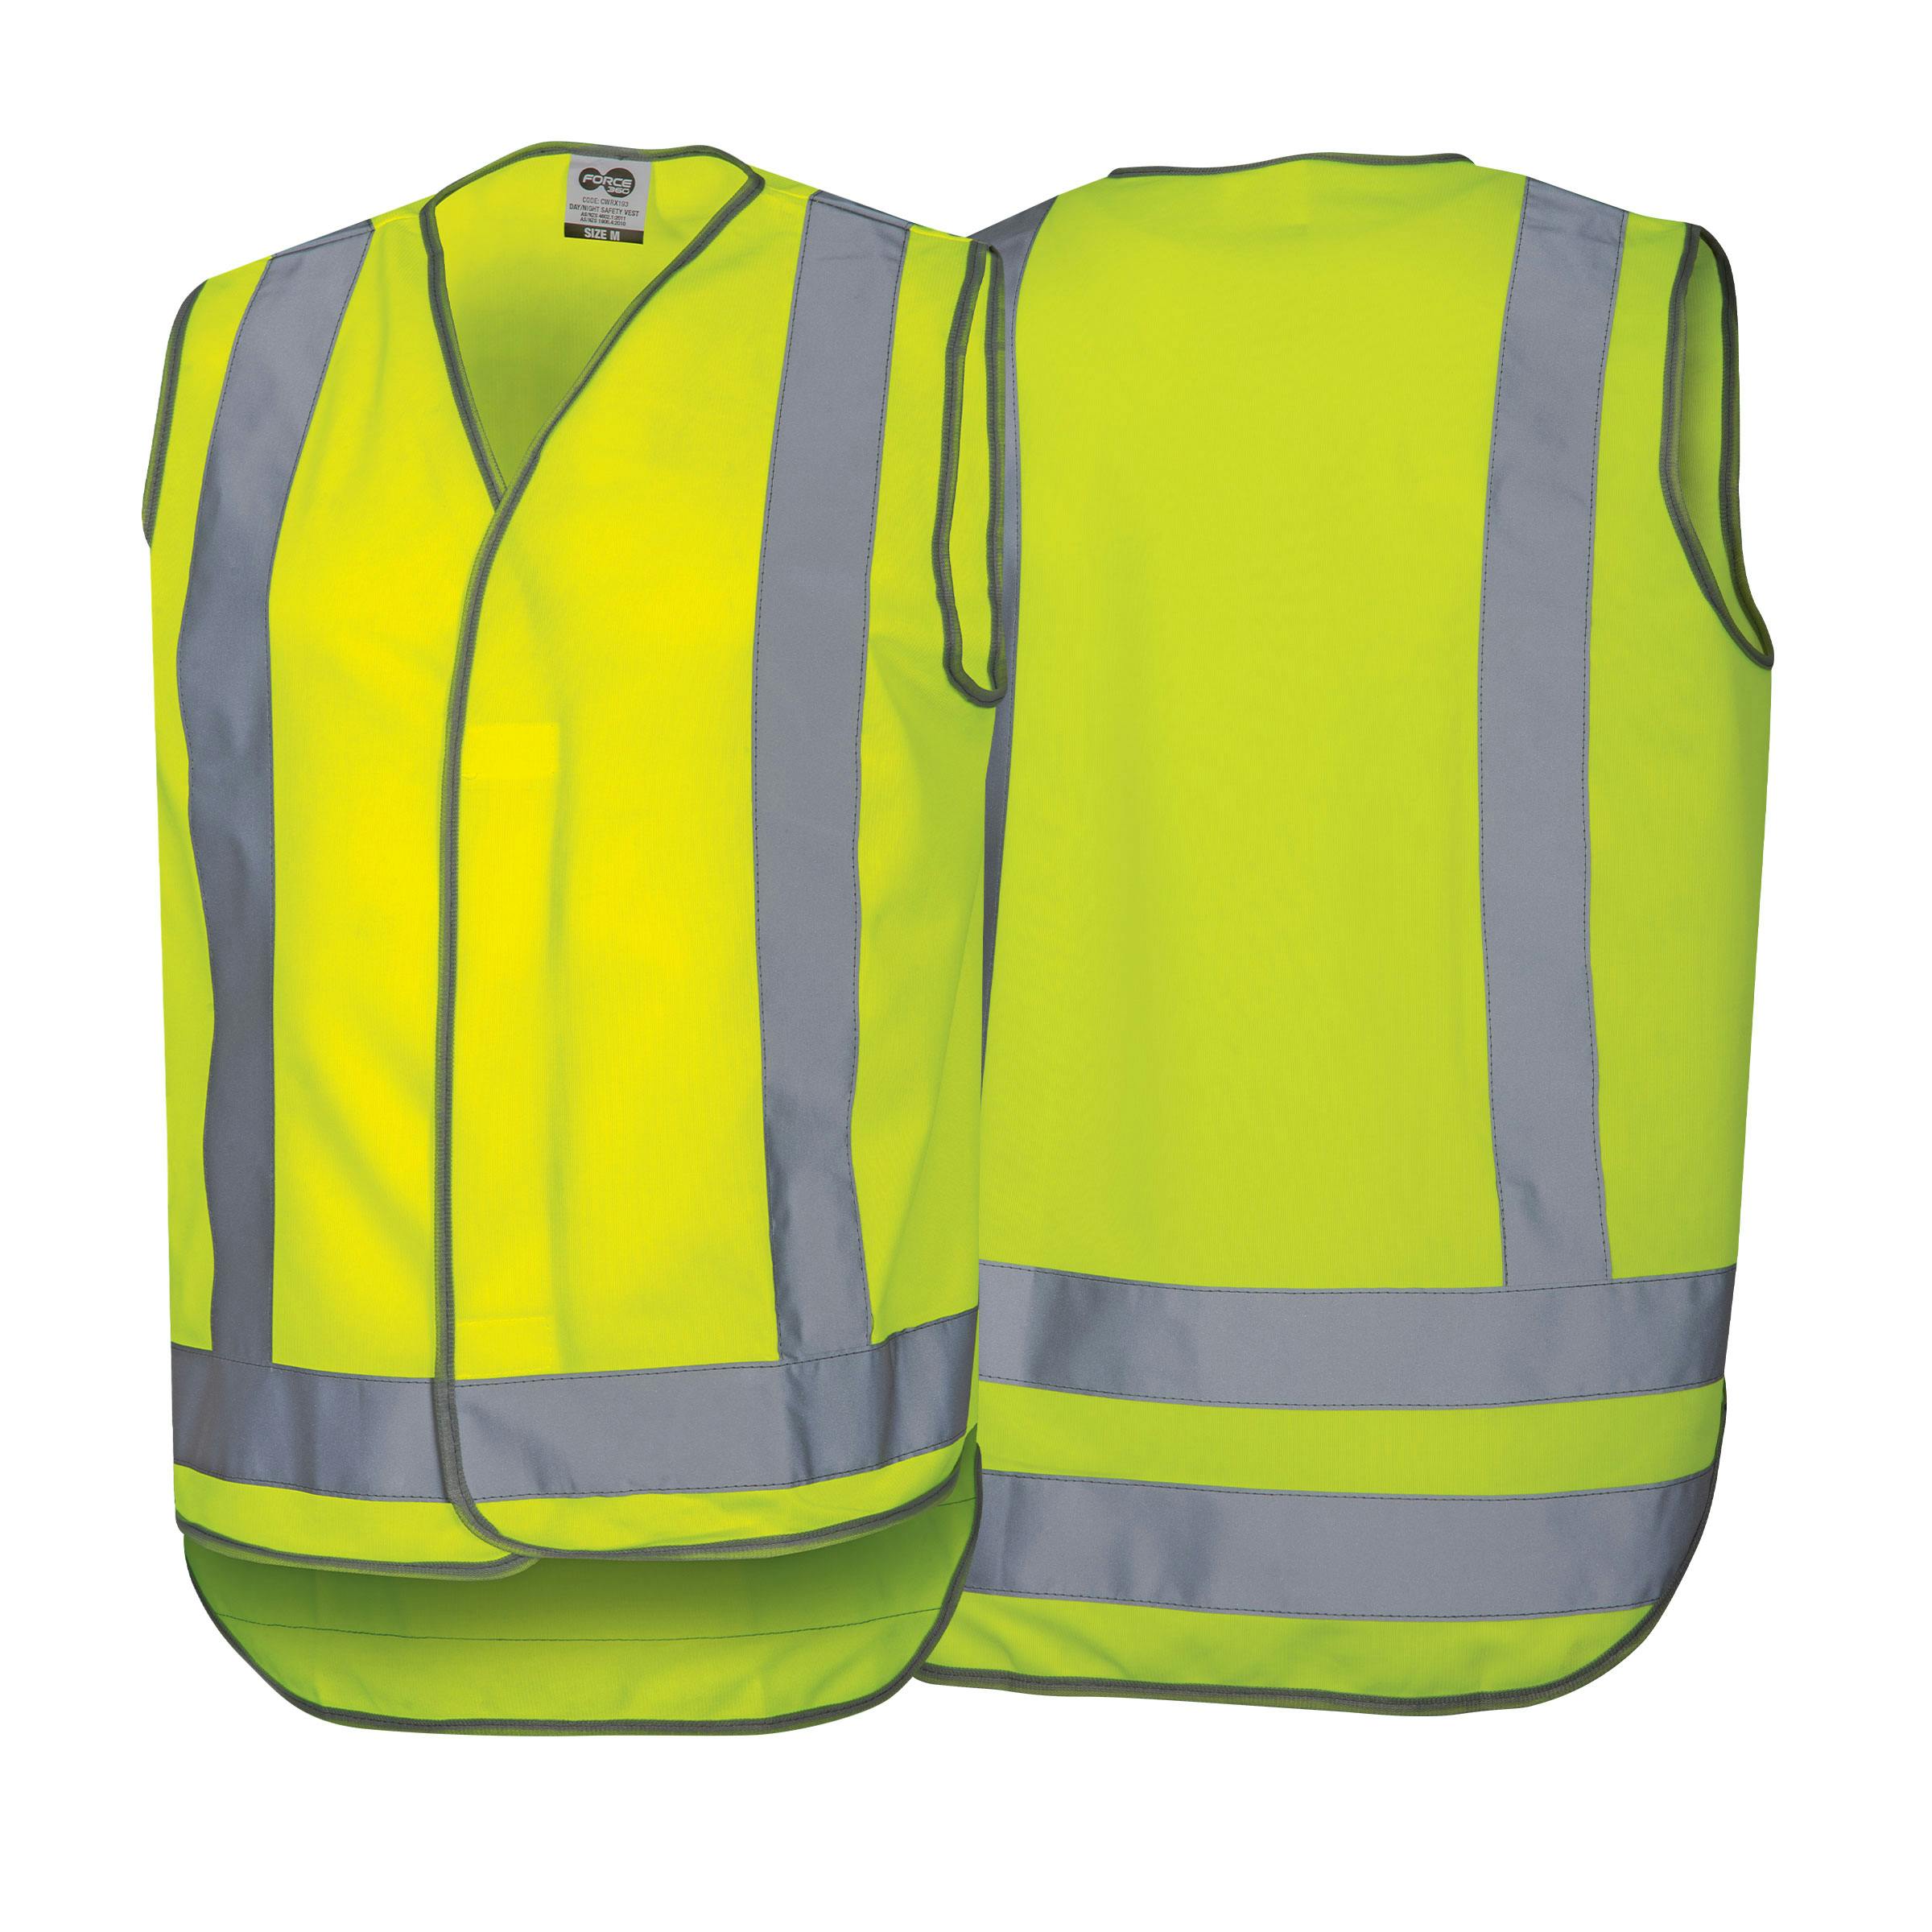 Force360 Yellow Day/ Night Safety Vest (Hi-Vis Yellow)